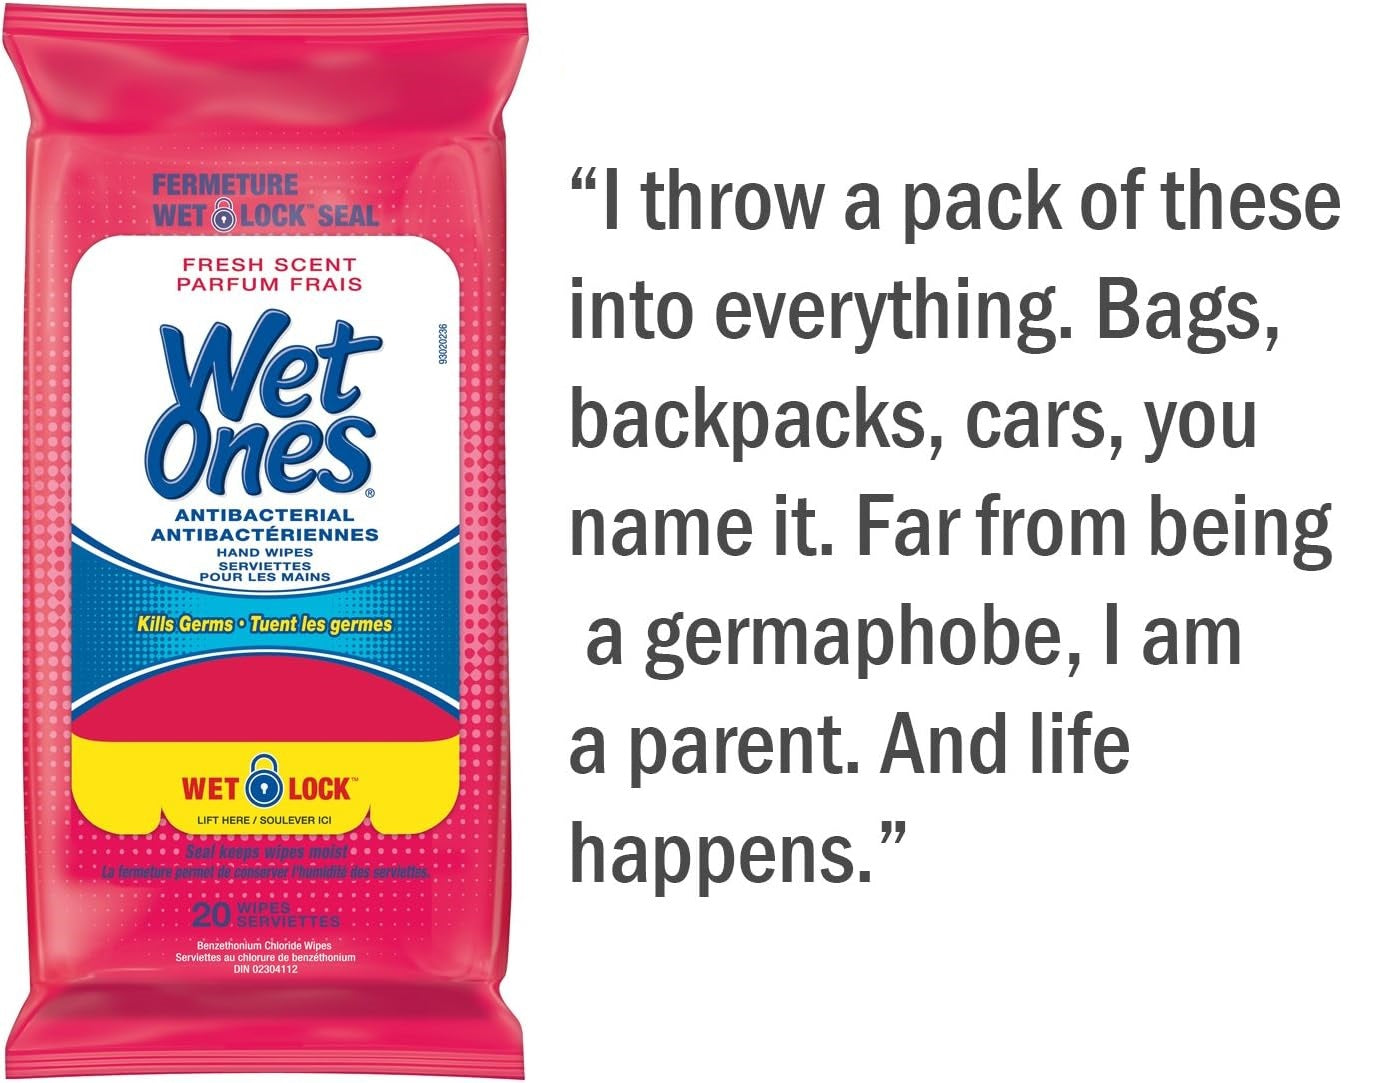 Wet Ones Fresh Scent Antibacterial Hand Wipes Review Canada